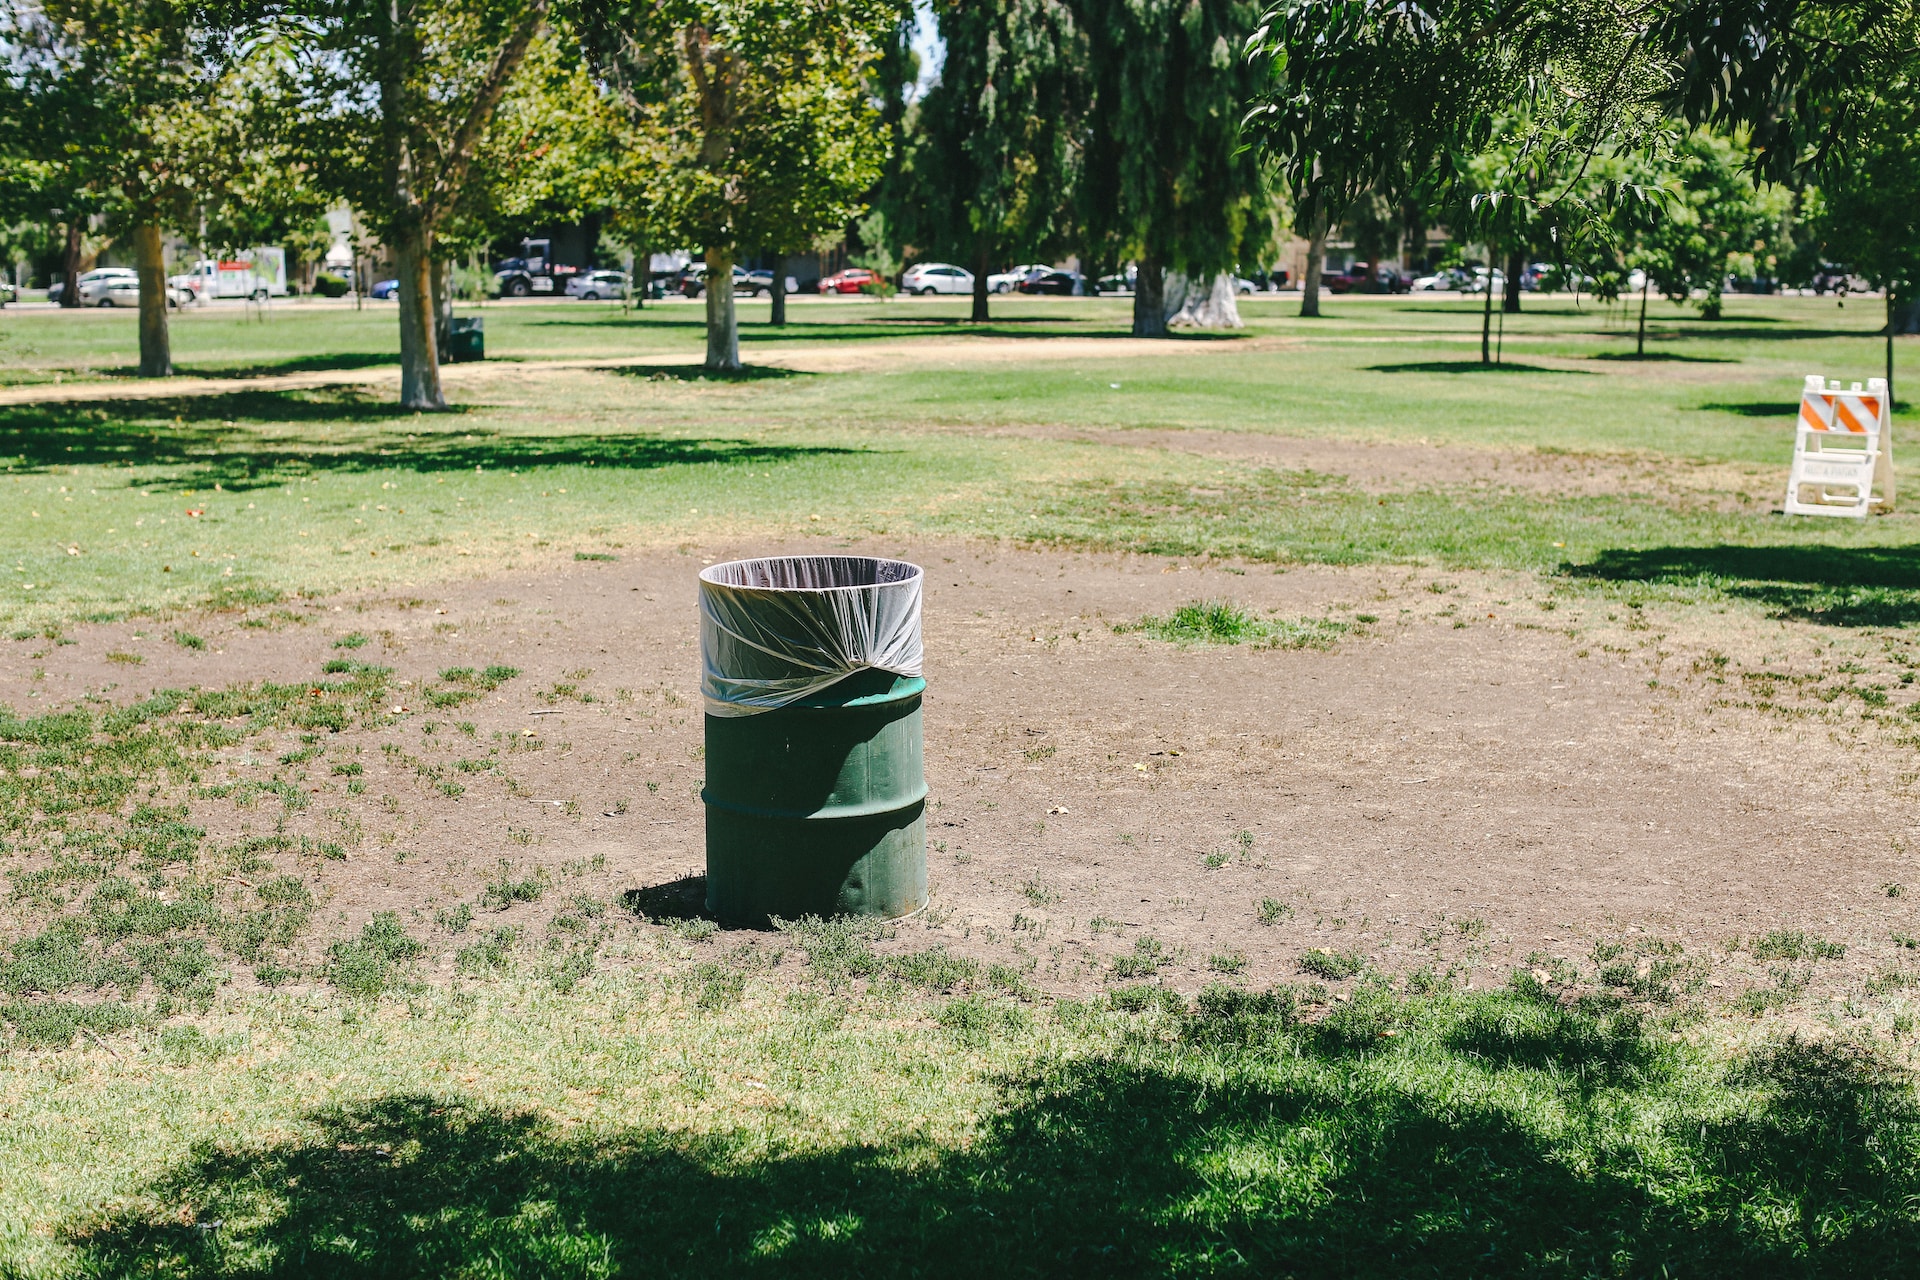 Turning a new leaf: 11 inspiring initiatives in the battle against park littering.